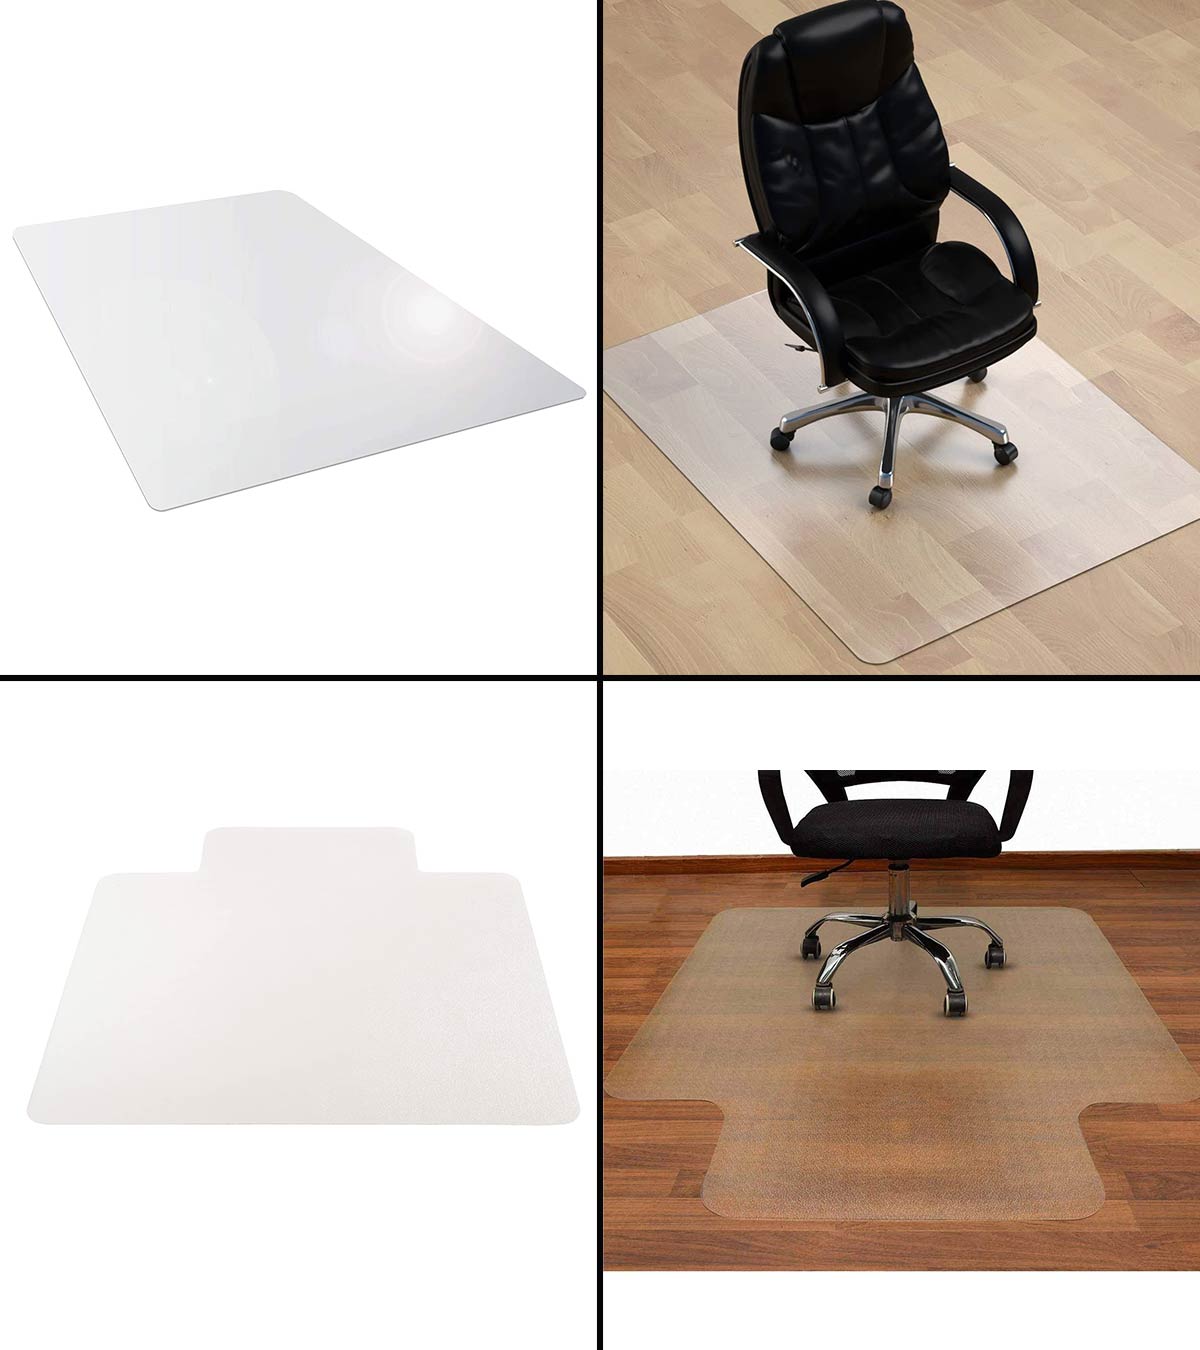 New 48" x 59" Hard Floor Home Office PVC Mat Square for Office Rolling Chair US 